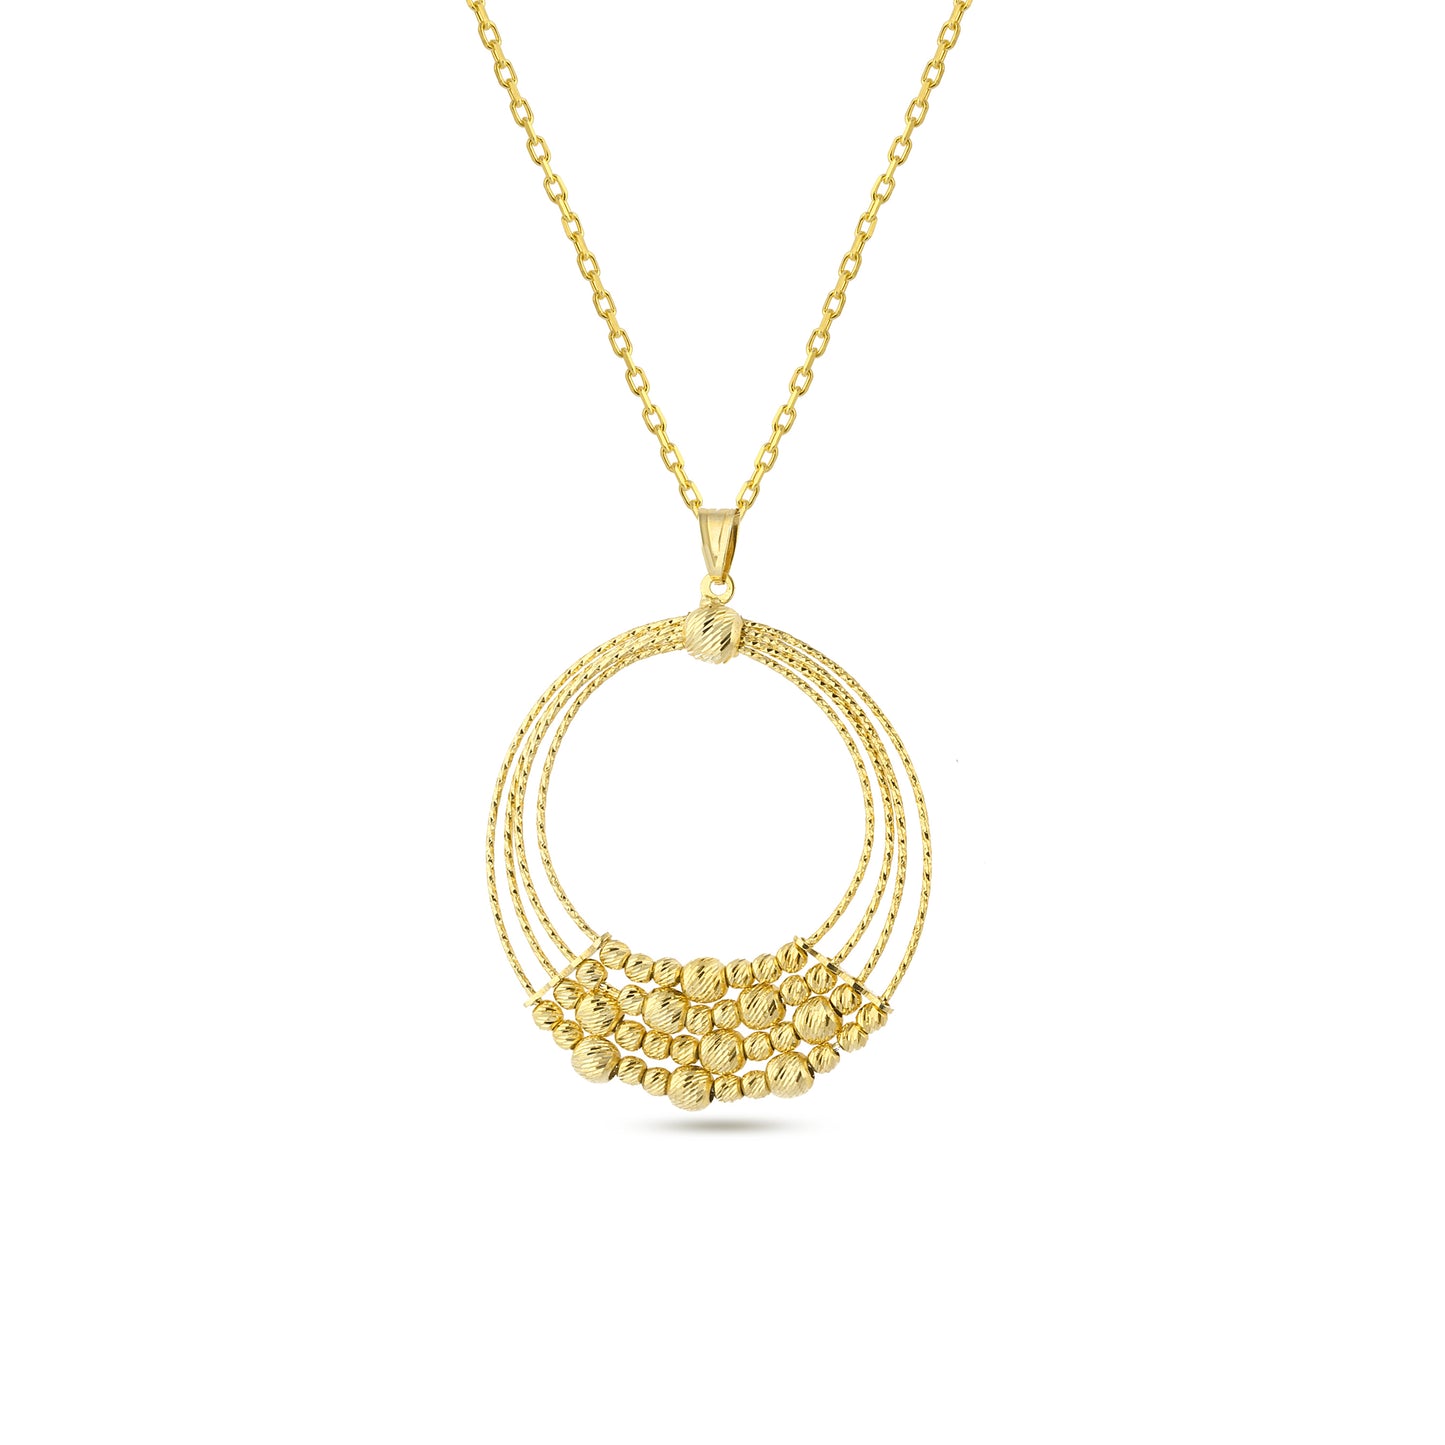 Love Circle, Round, Necklace , Pendant Chain 14k Gold Plated 925 Sterling Silver Jewelry